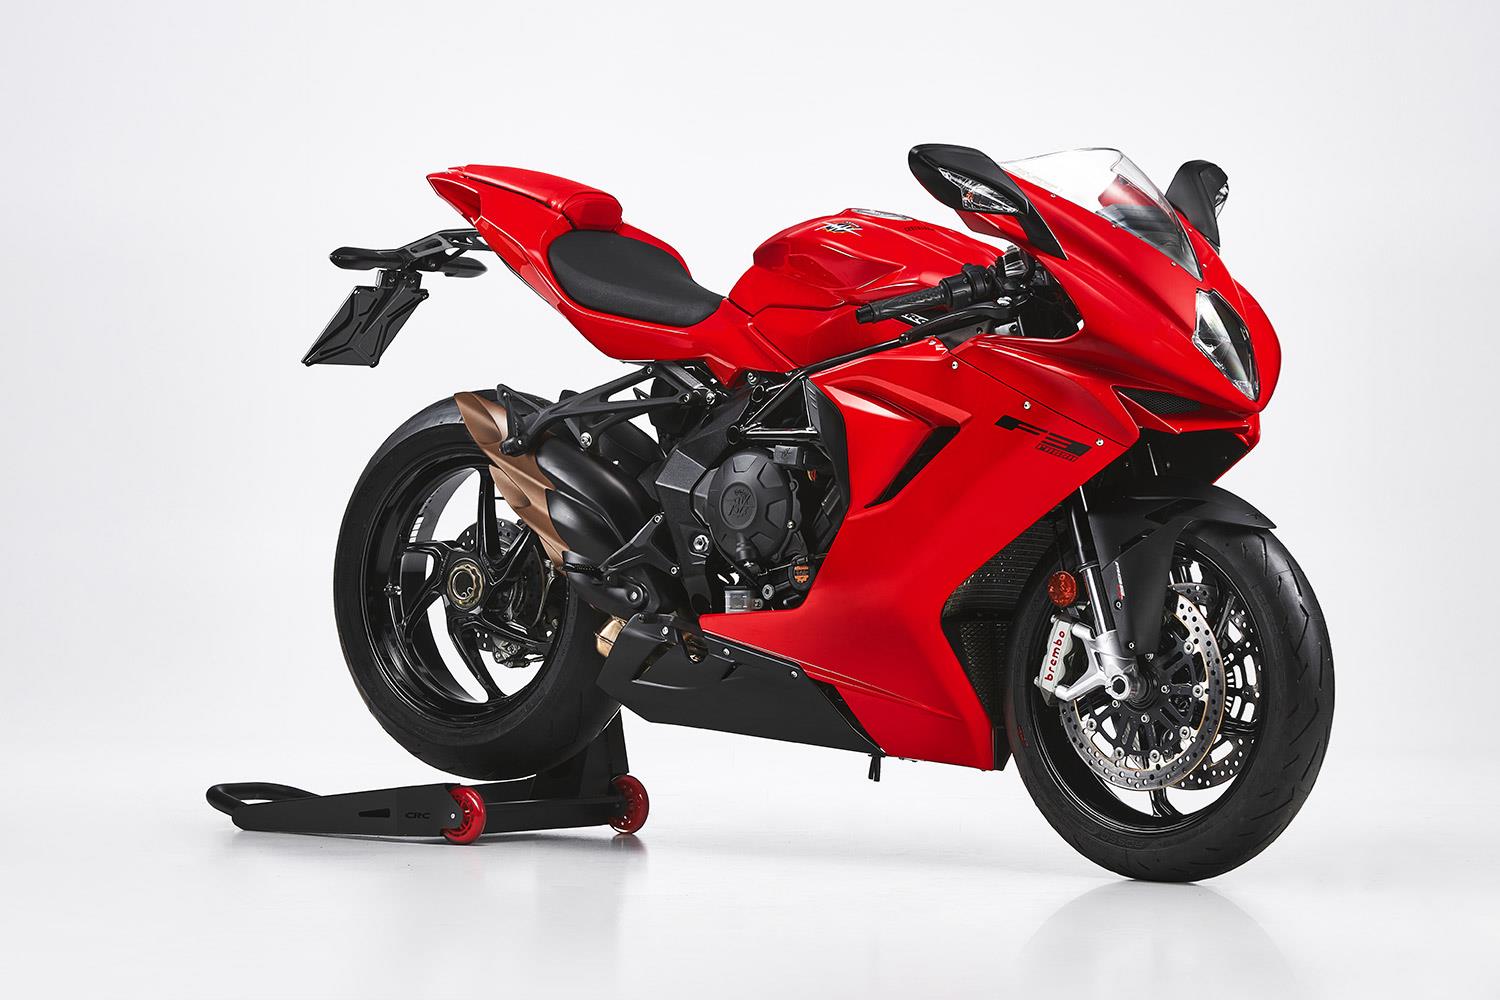 Seeing red: MV Agusta F3 800 Rosso unveiled